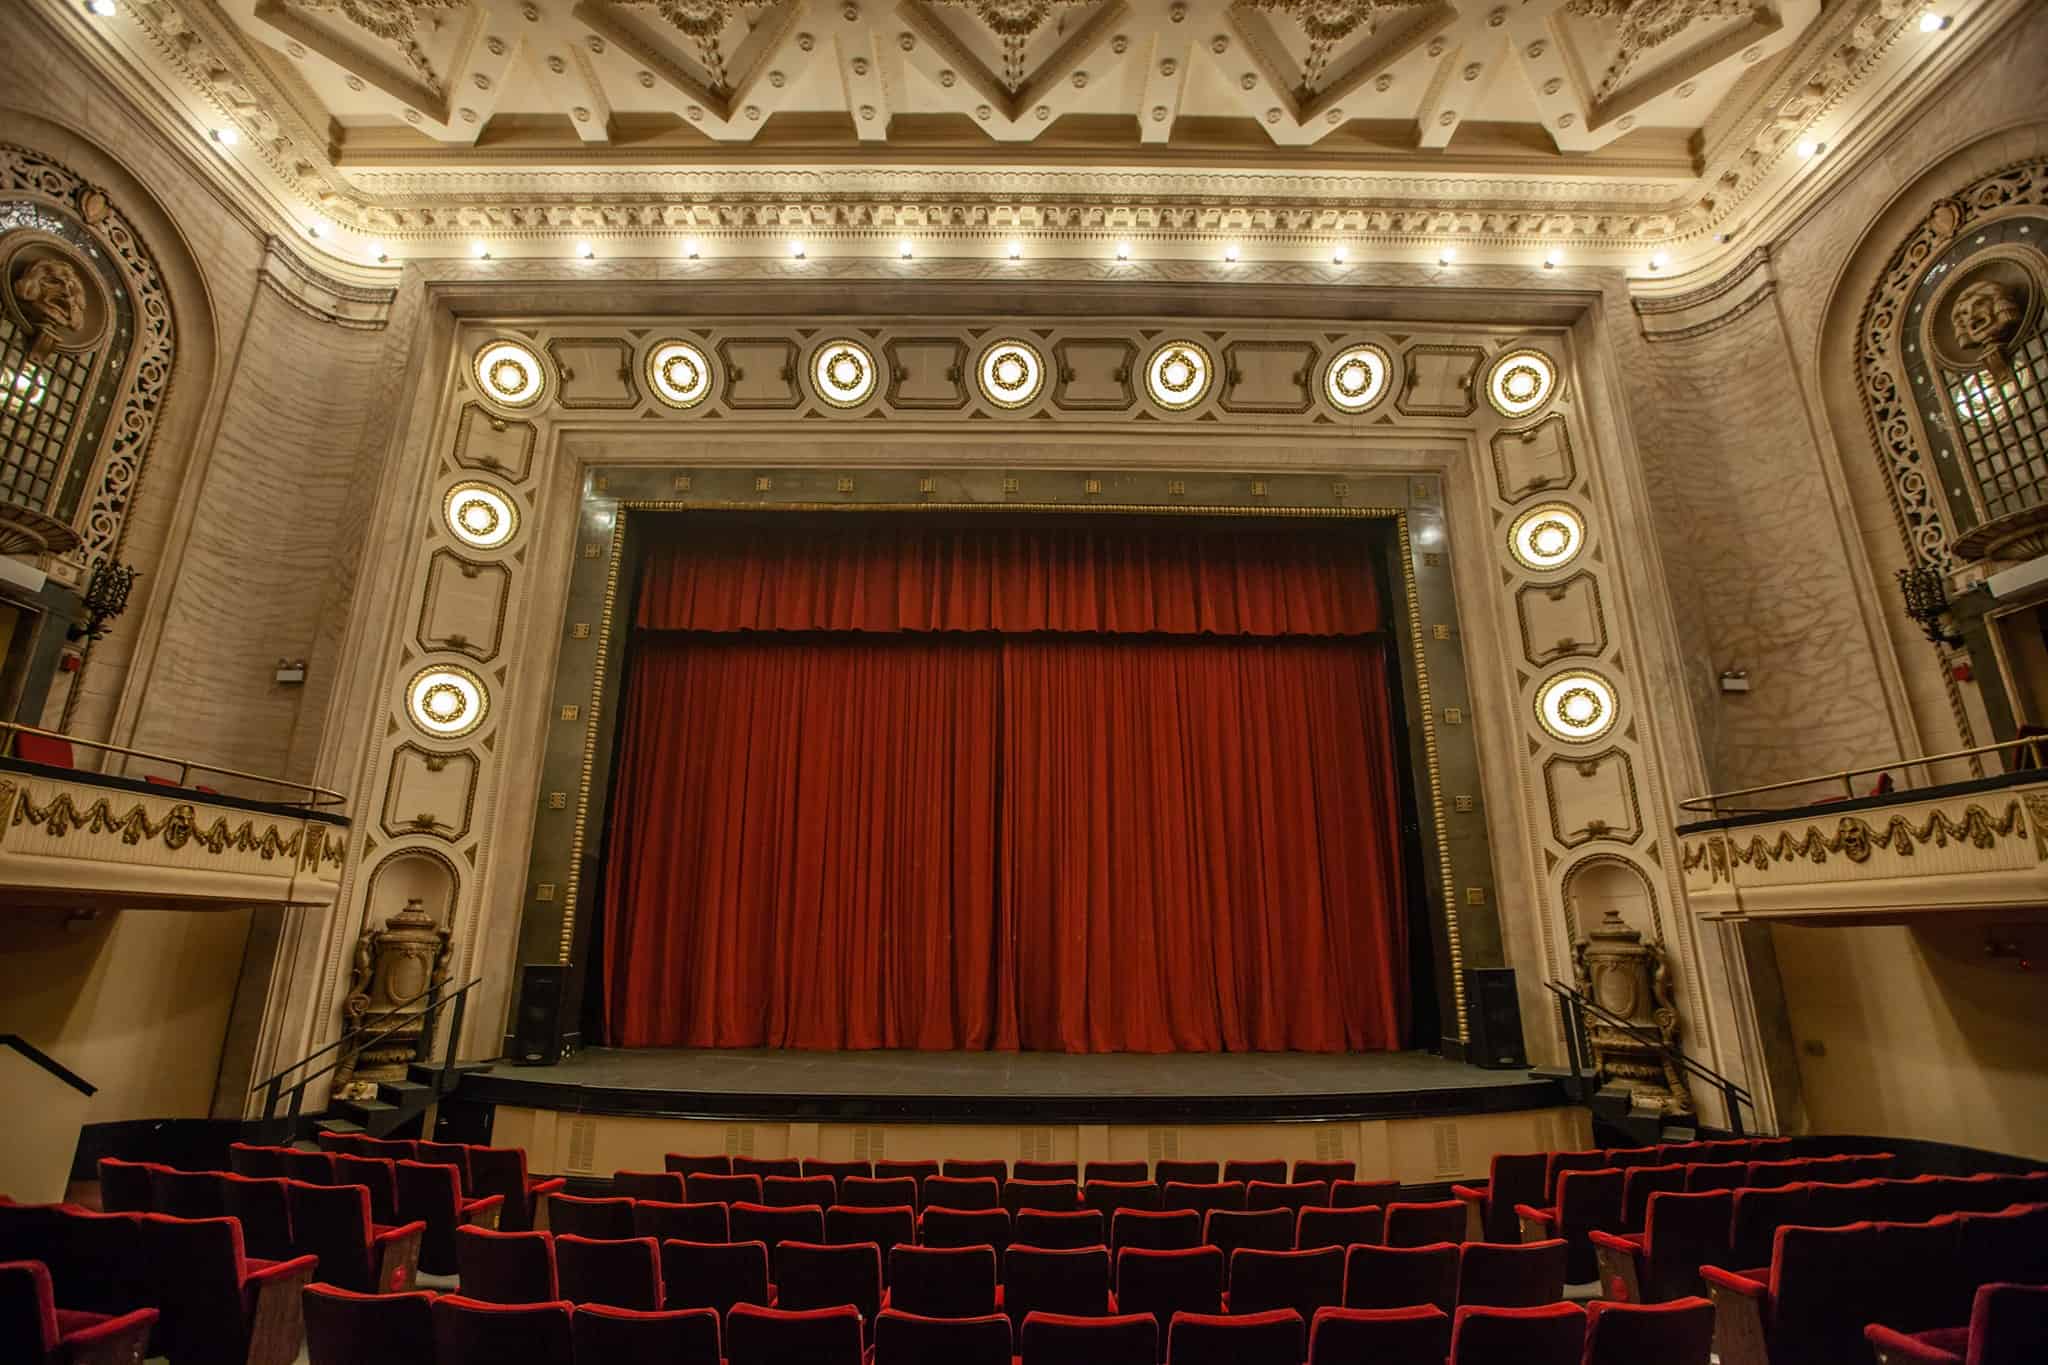 Image Description: The curtain of the Studebaker Theater.